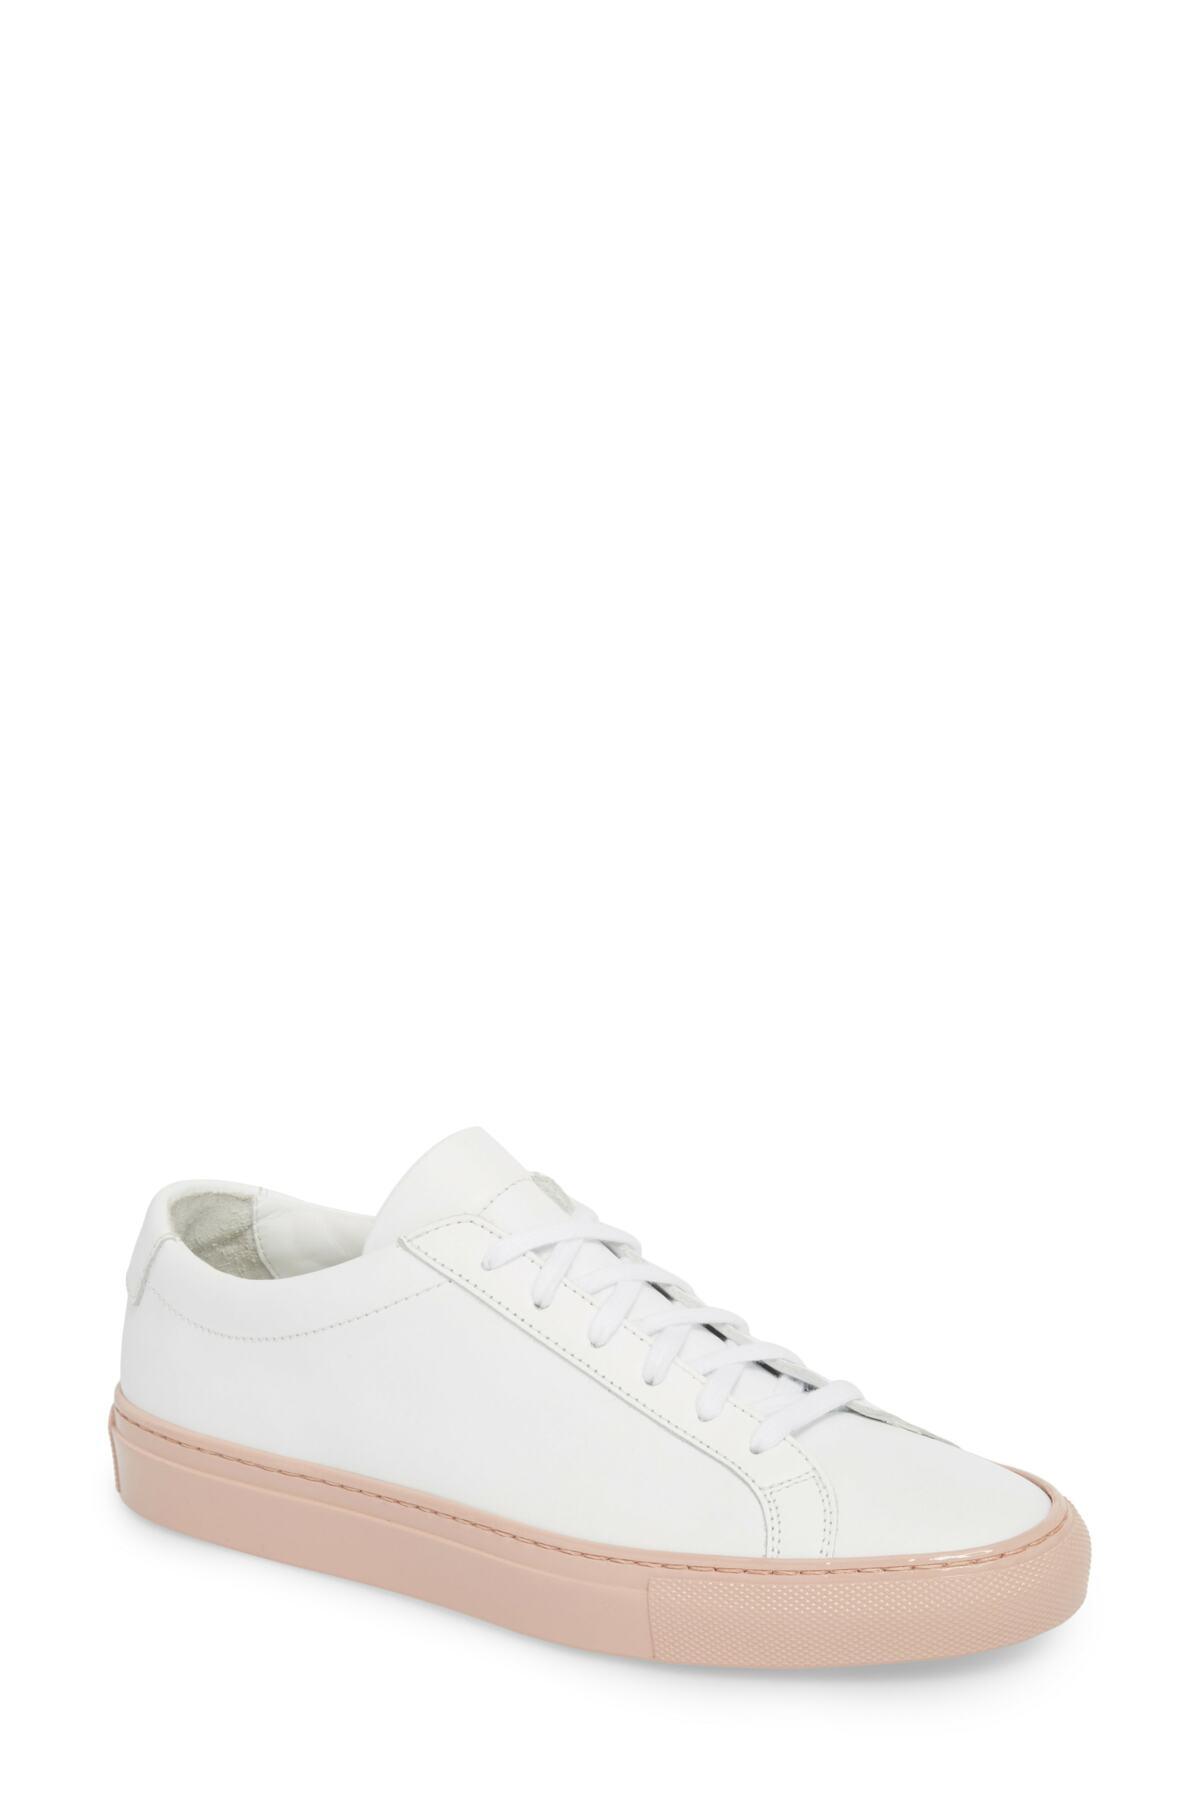 Common Projects Leather Original Achilles Sneaker (women) in White - Lyst